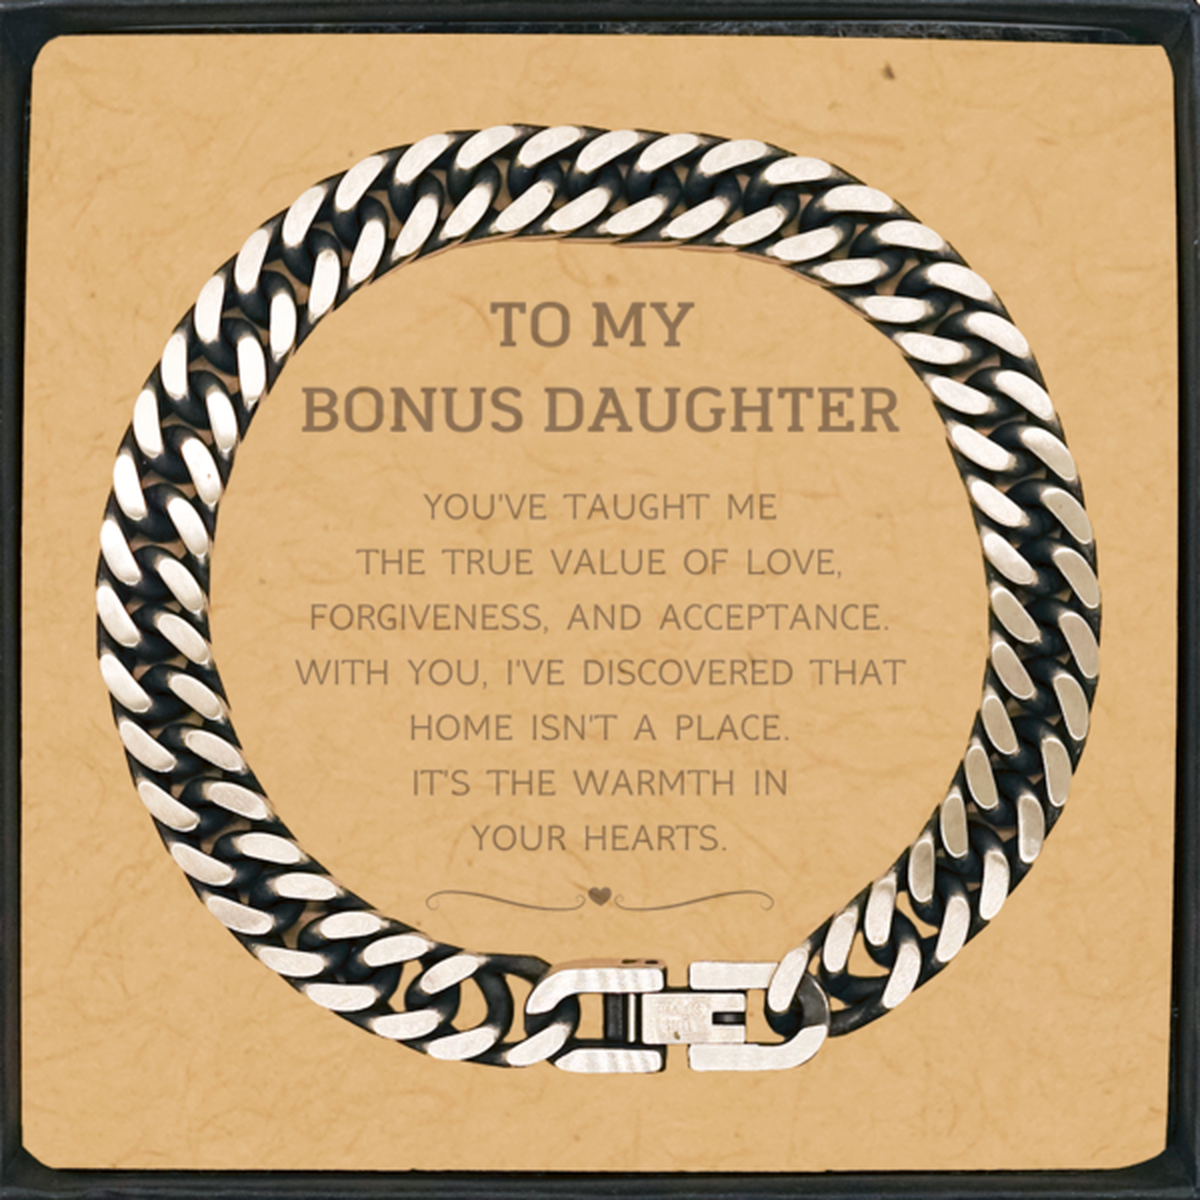 To My Bonus Daughter Gifts, You've taught me the true value of love, Thank You Gifts For Bonus Daughter, Birthday Cuban Link Chain Bracelet For Bonus Daughter